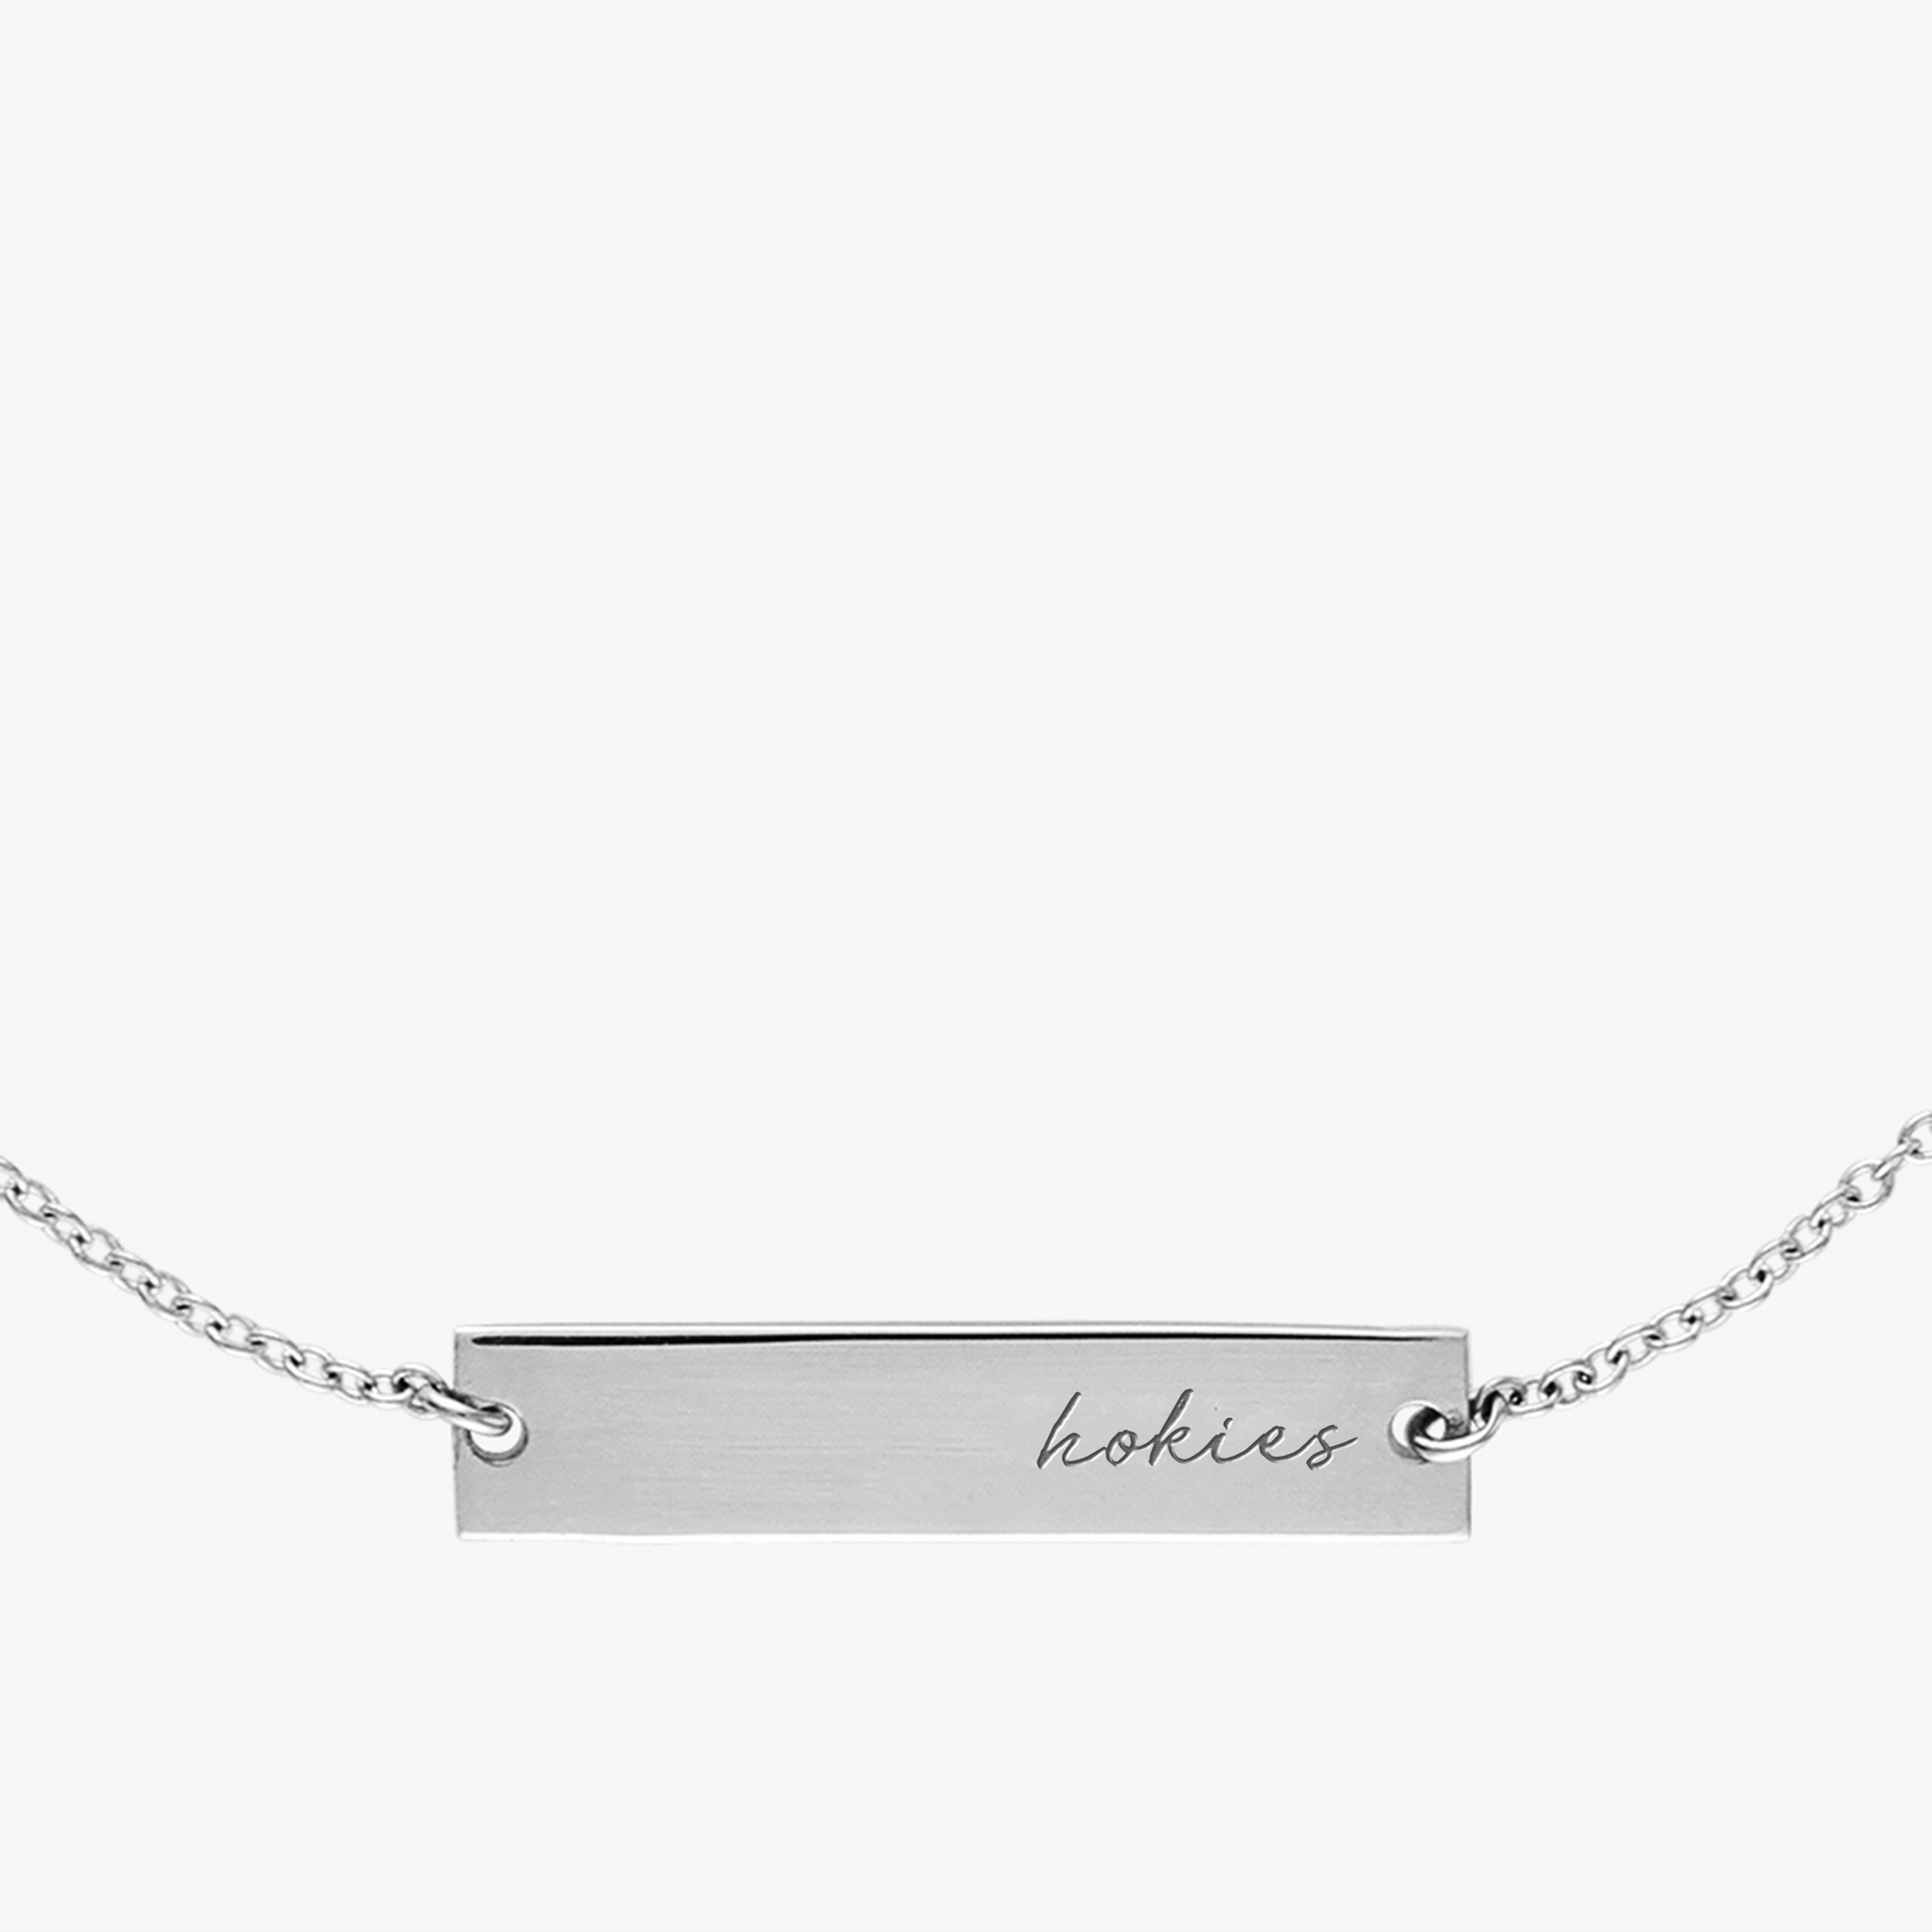 University of Virginia Horizontal Necklace Sterling Silver Close Up